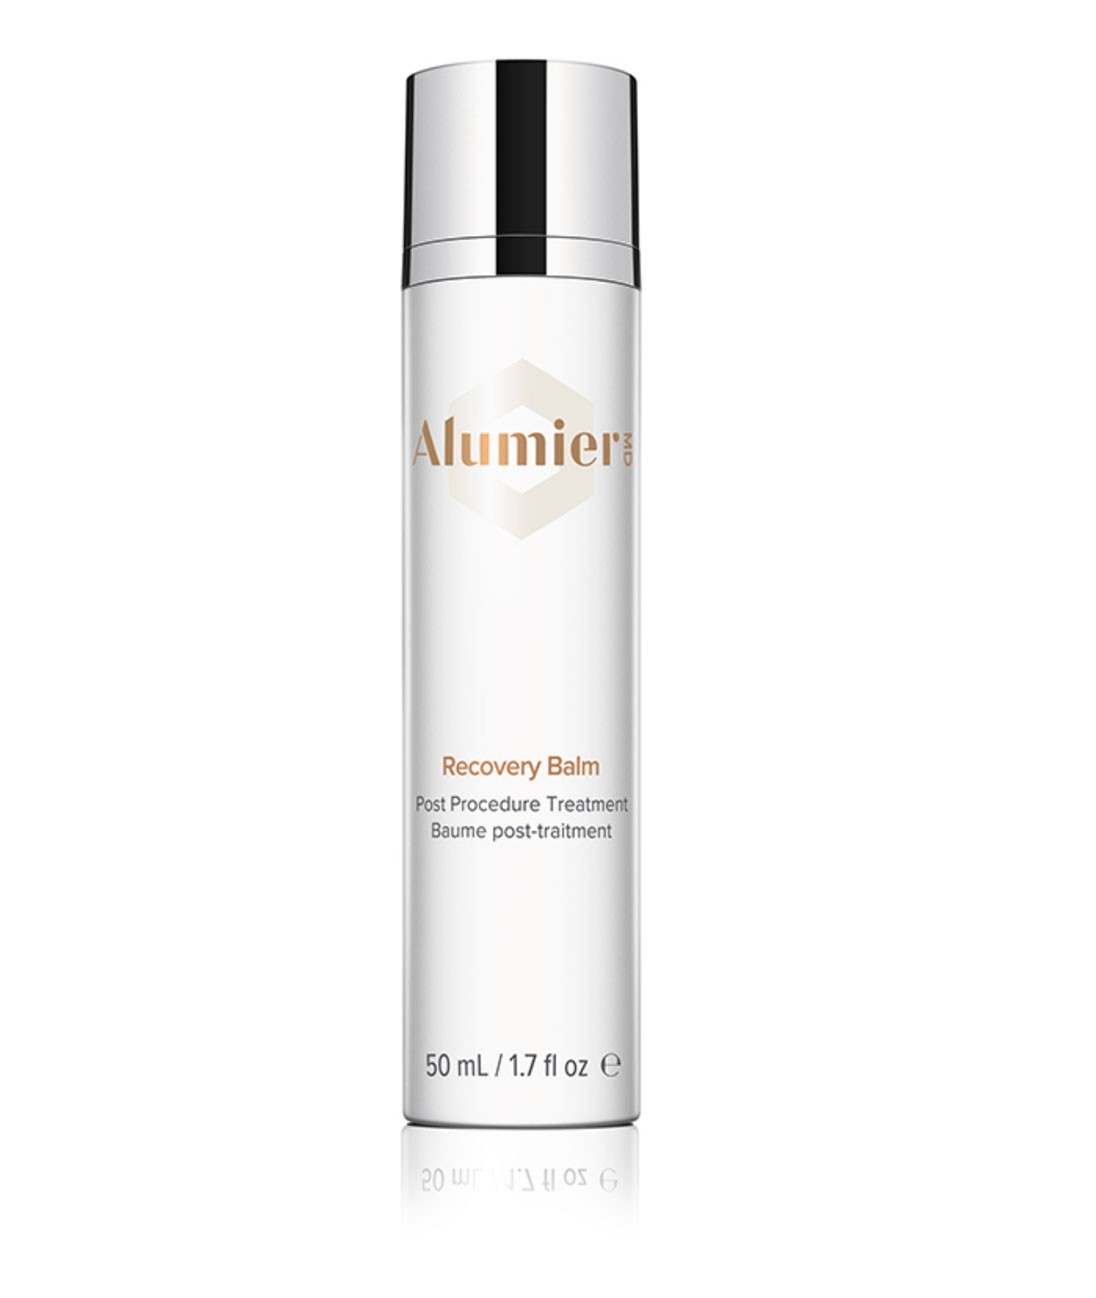 Alumier Recovery Balm